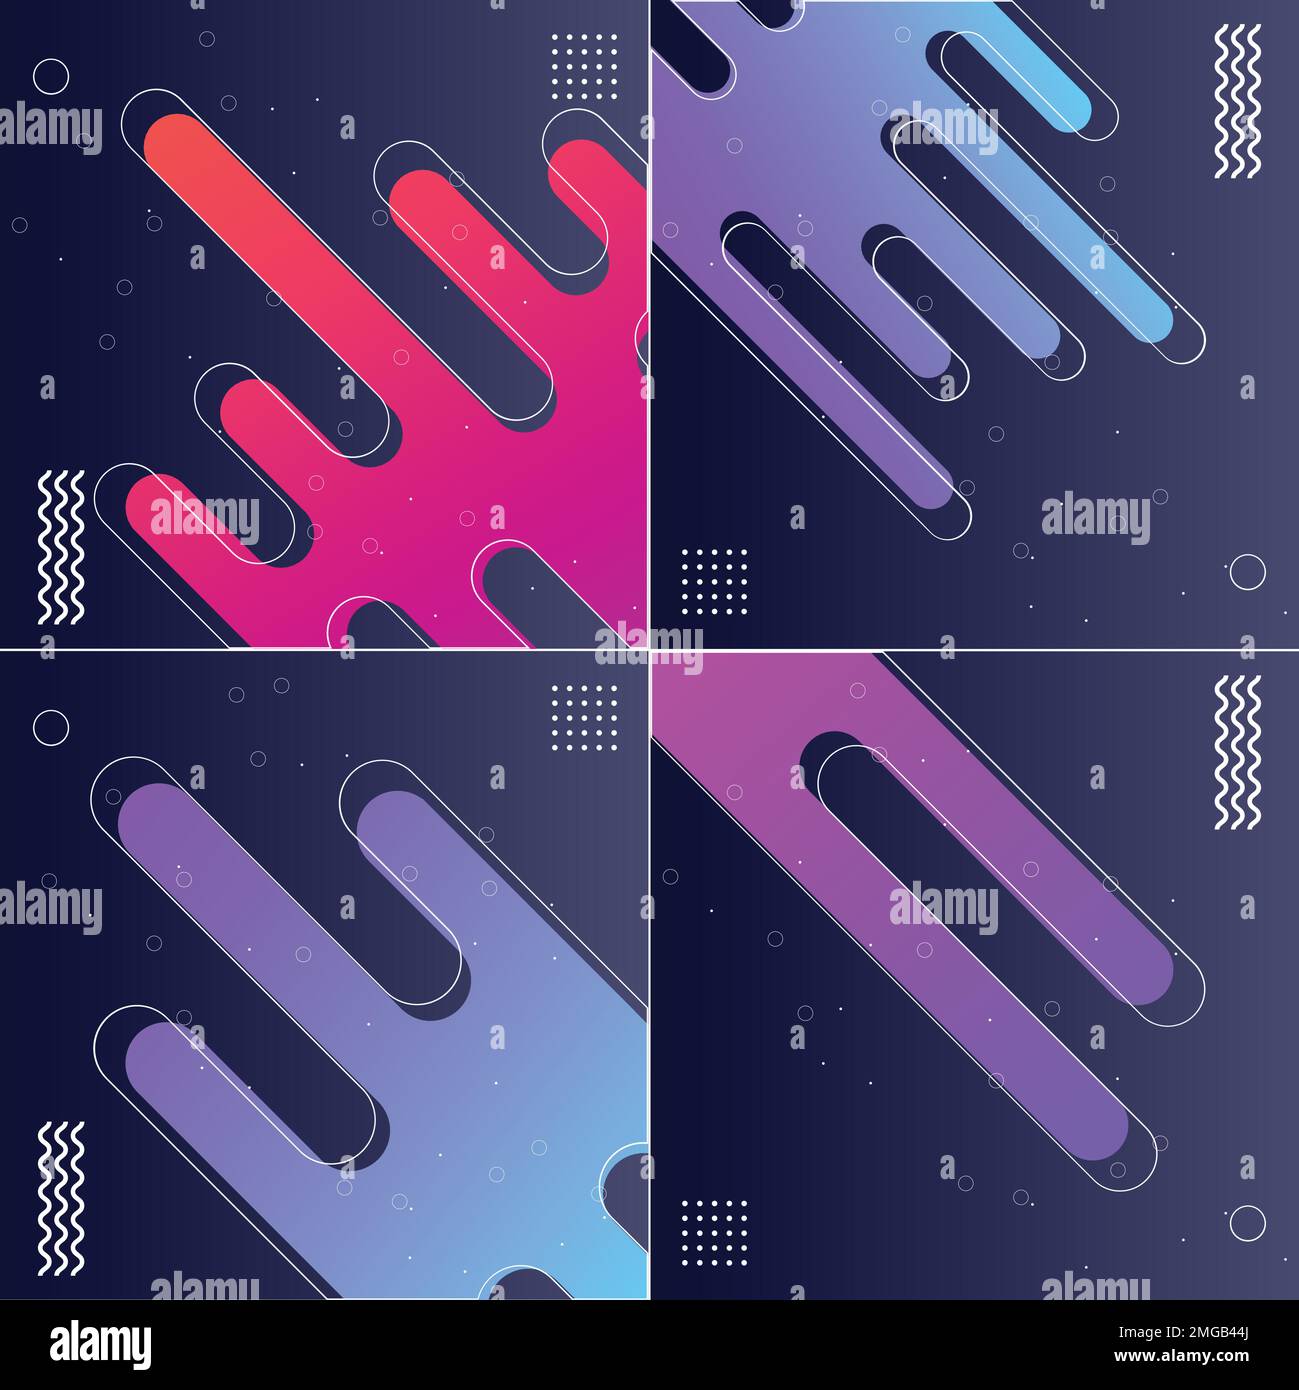 Pack of 4 Modish Backgrounds with Designed Shapes Vector Illustrations Stock Vector